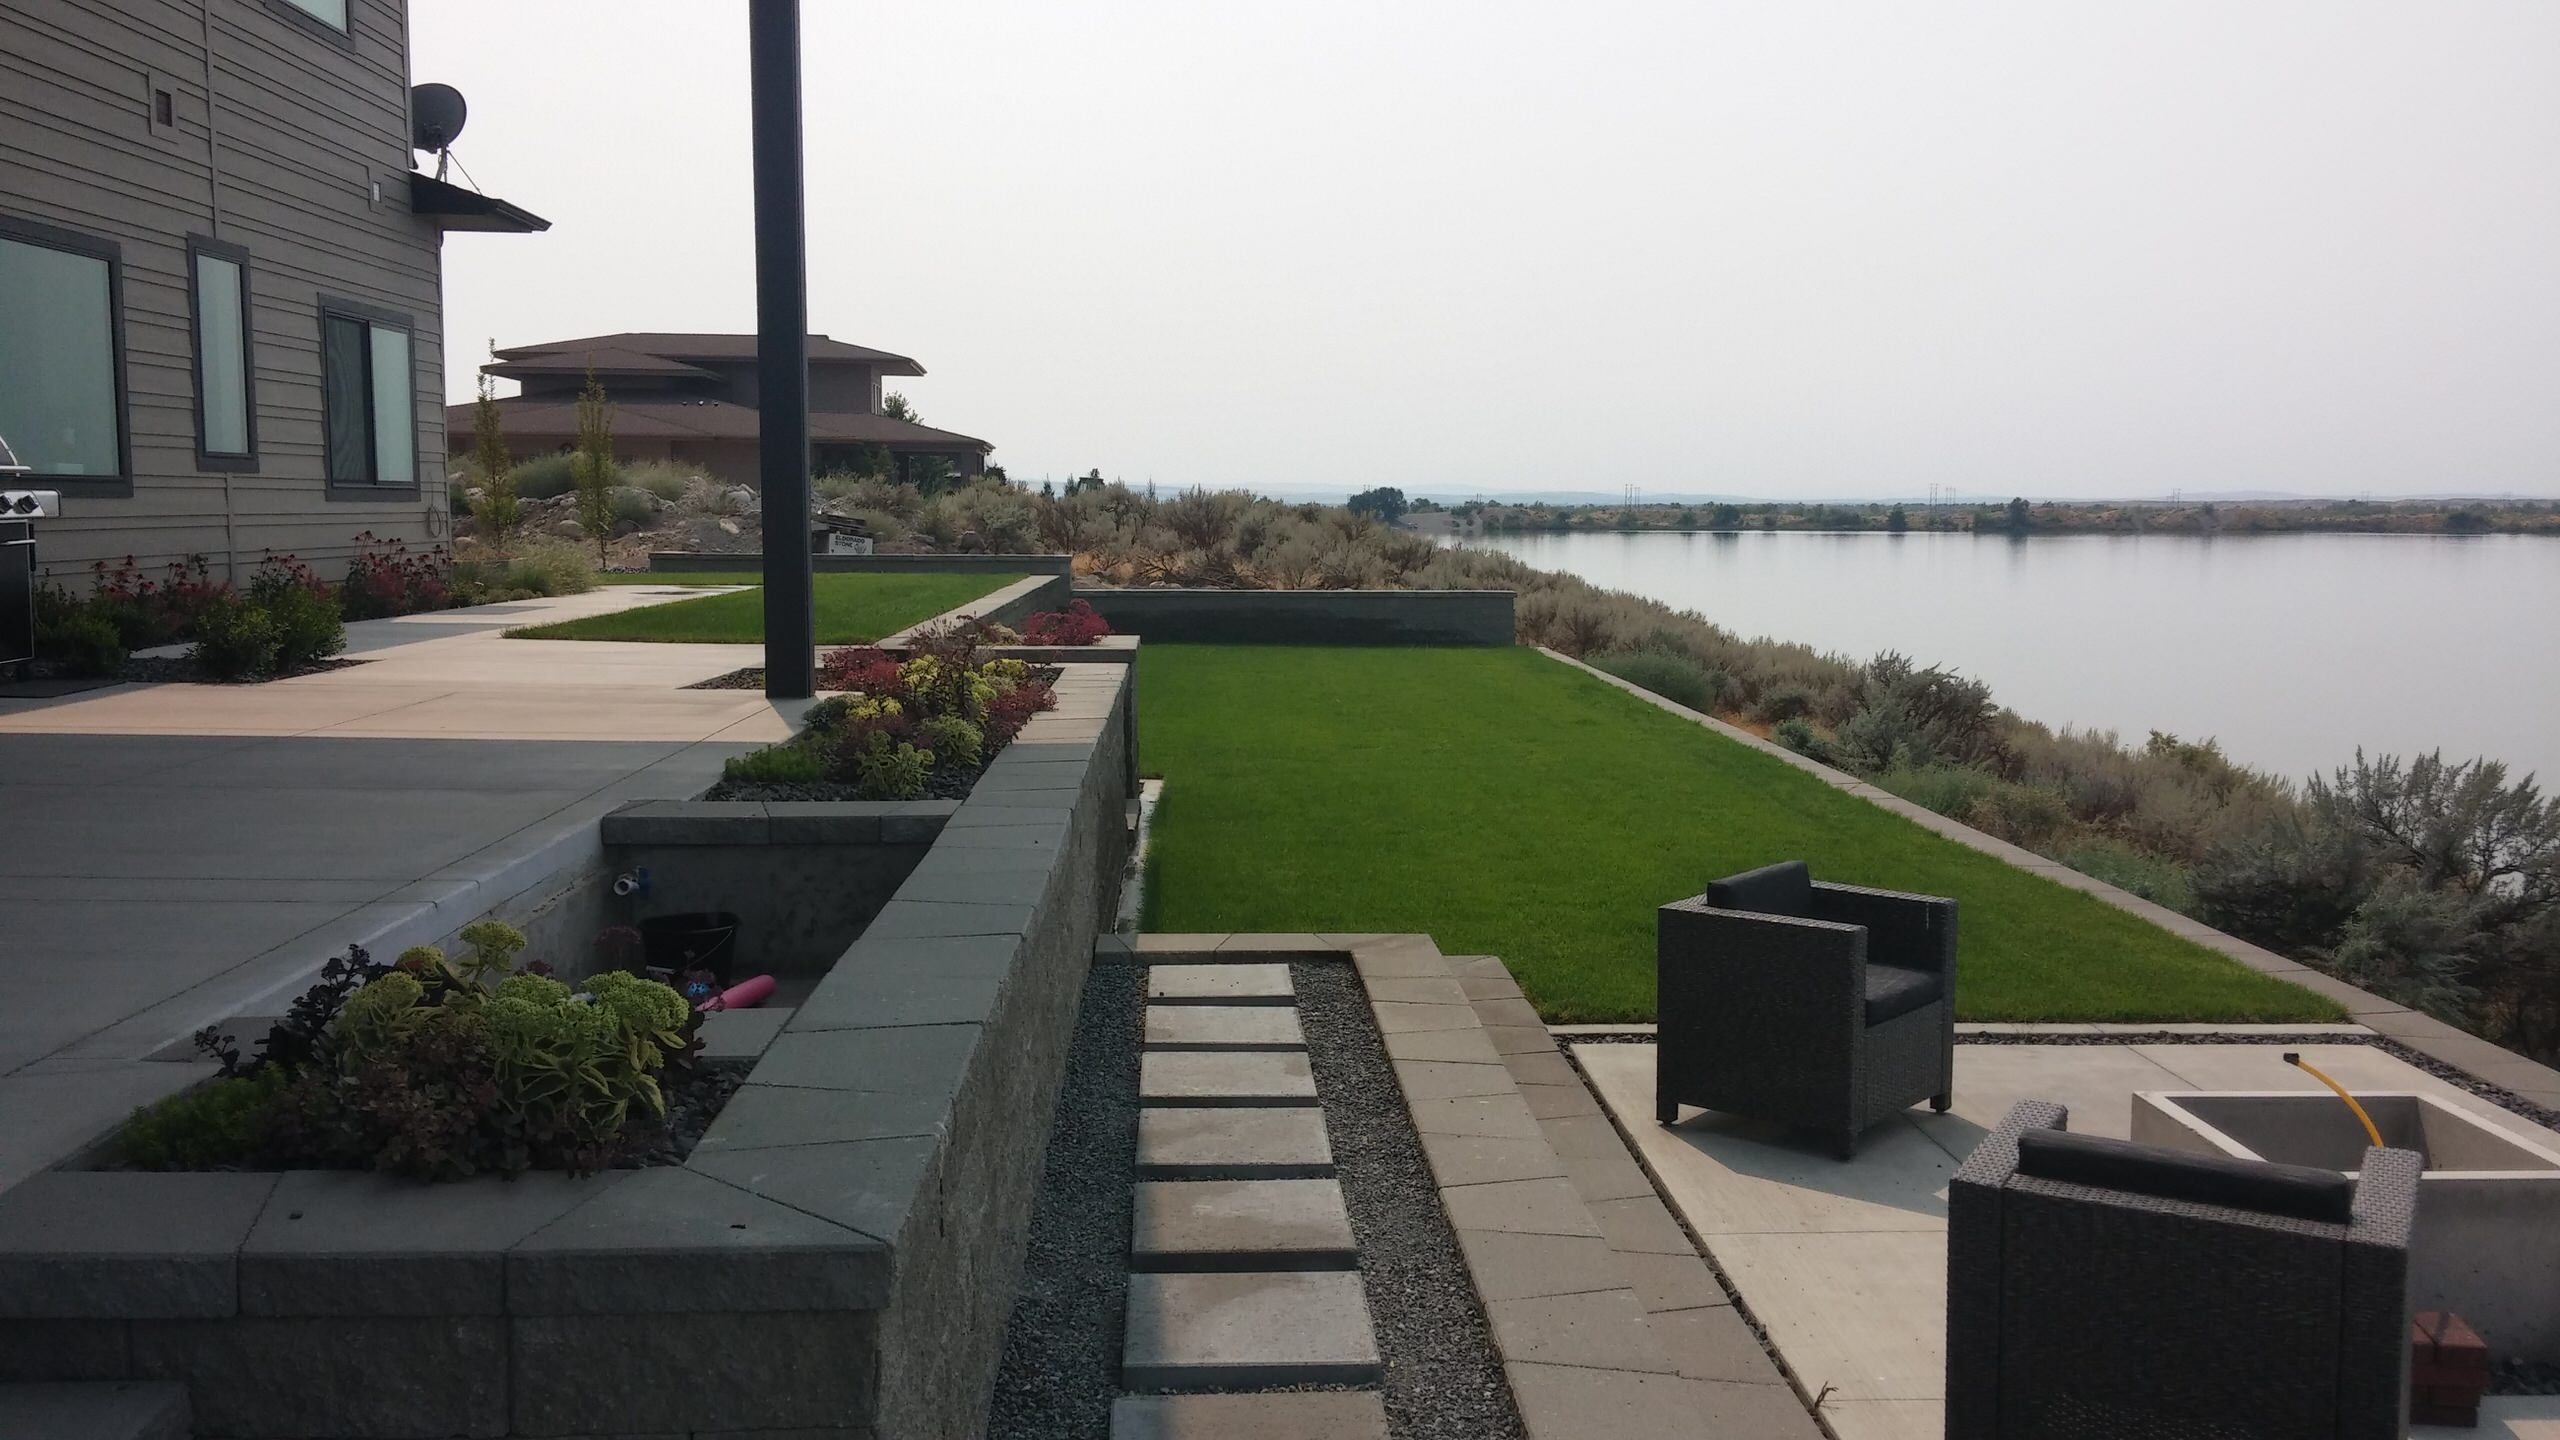 Linear garden terraces with lake view, fire pit, and recycling water urn fountain (under construction)